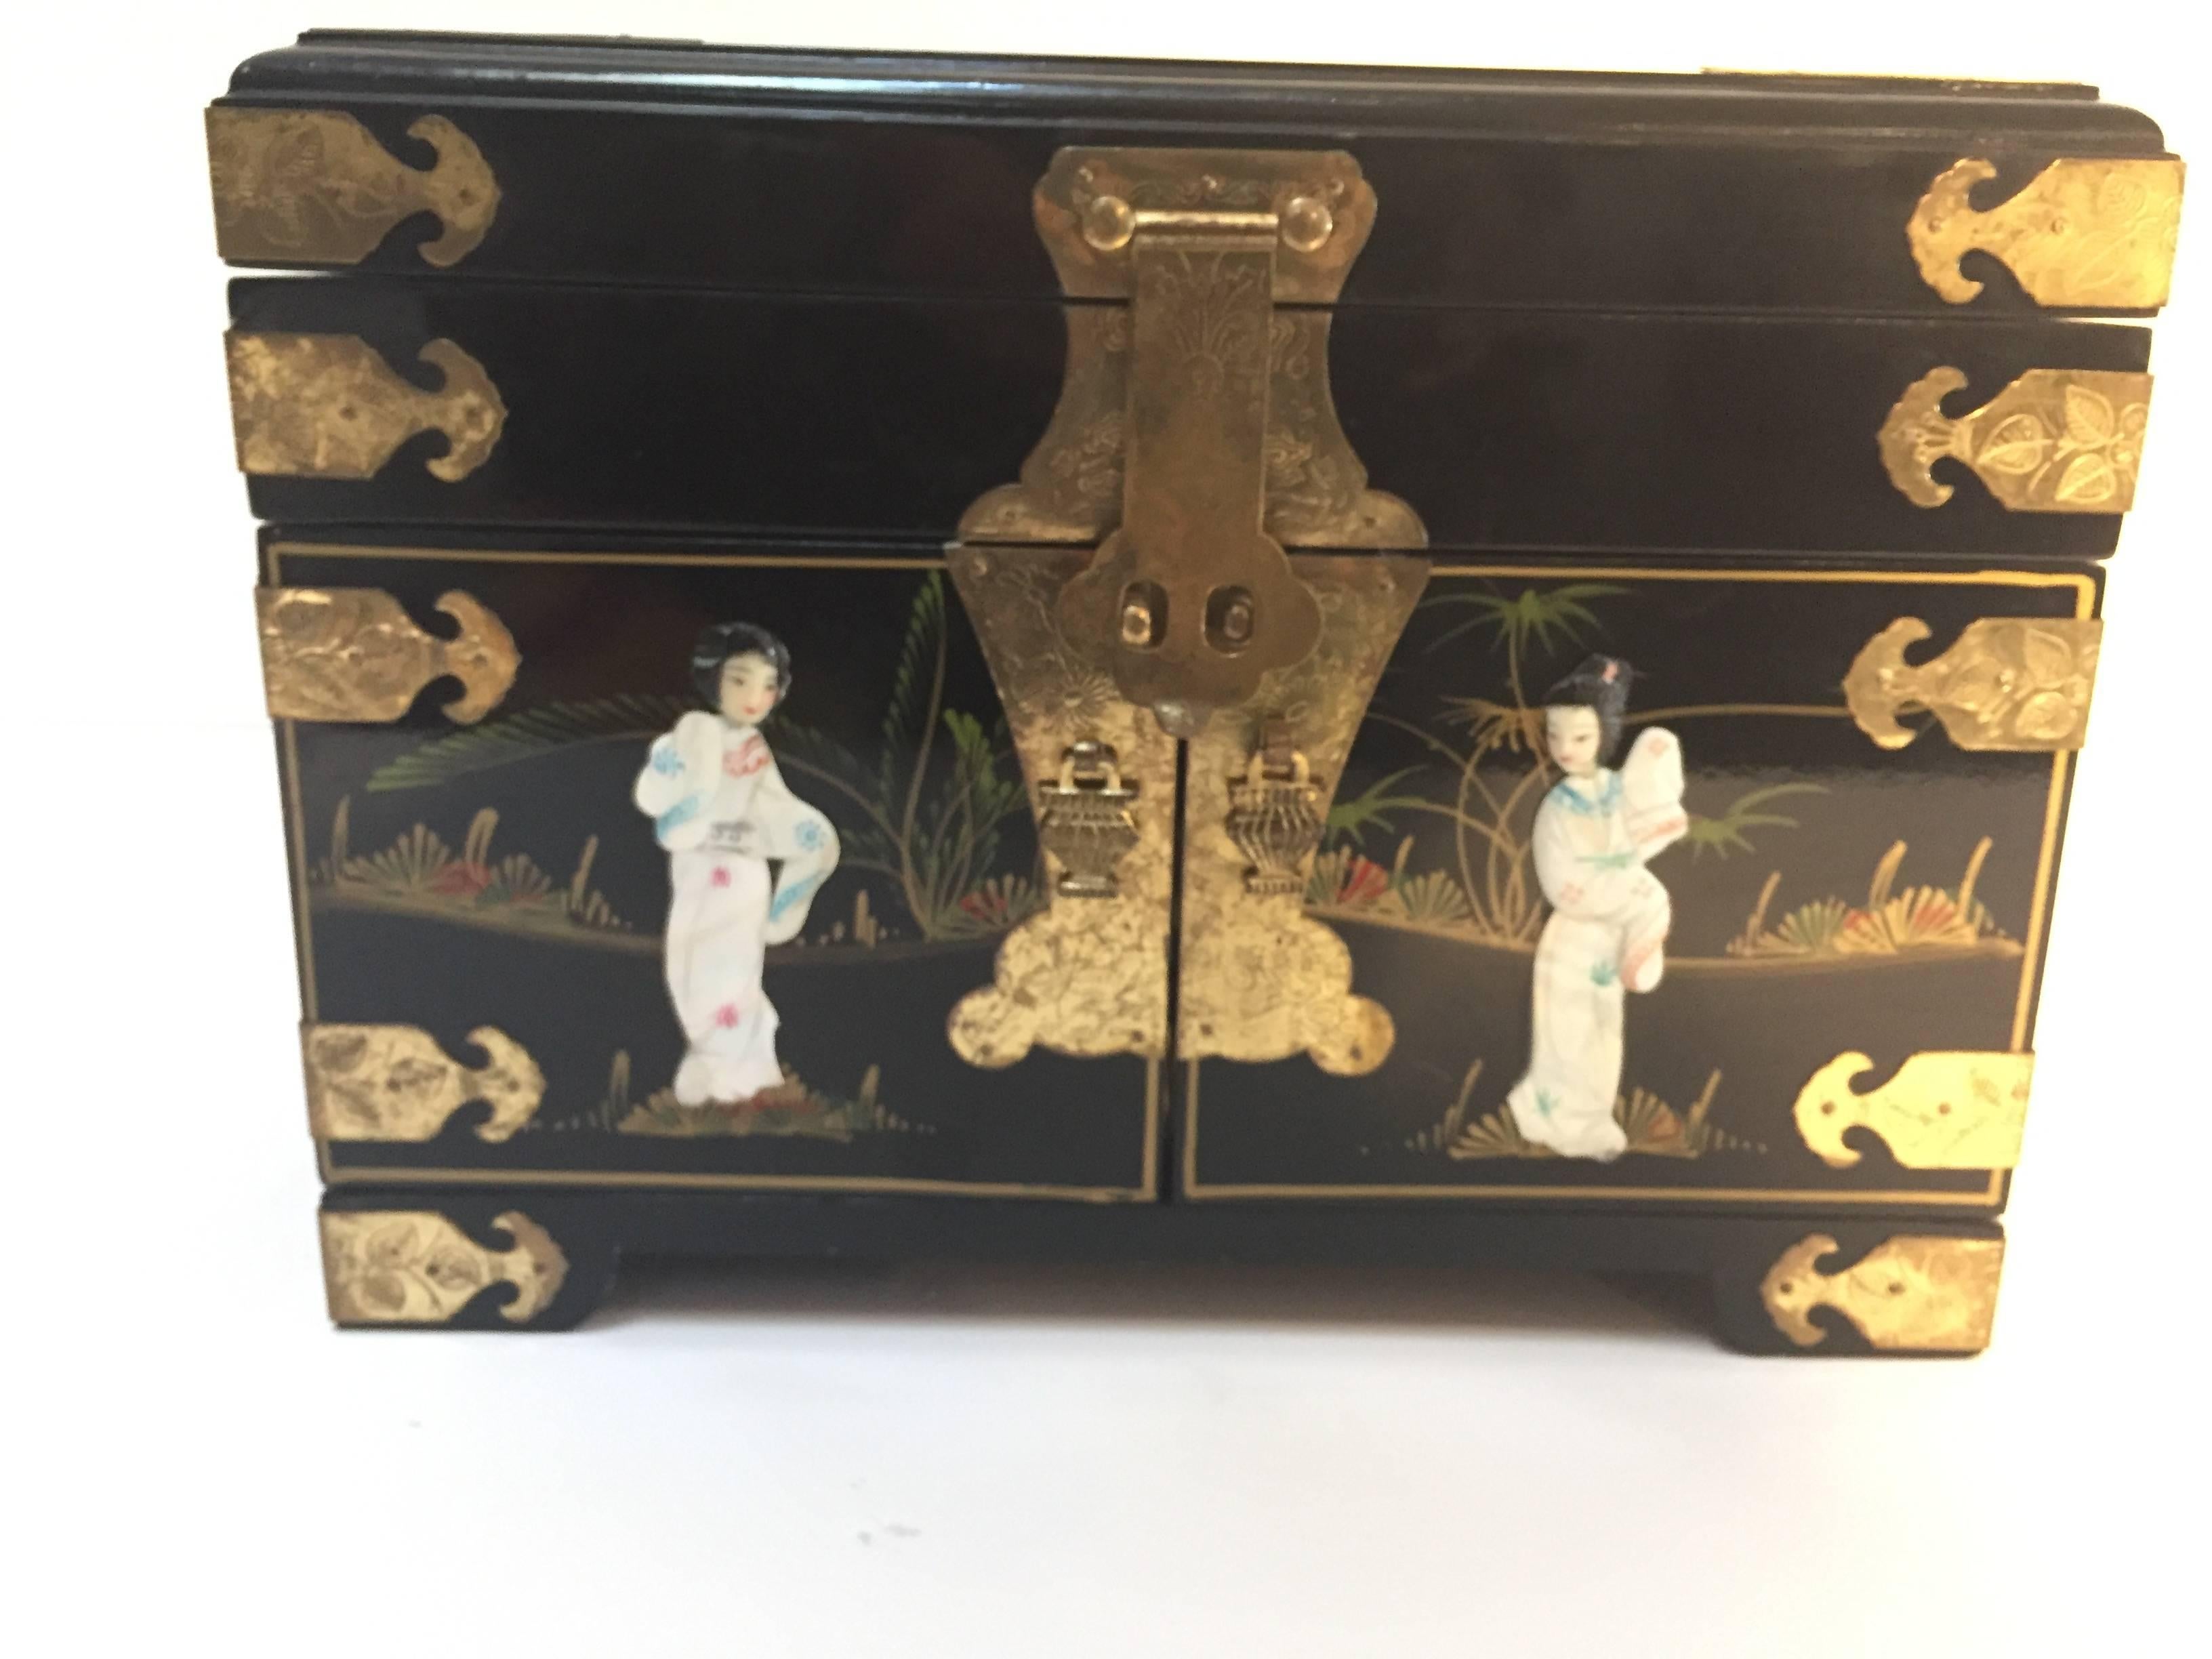 Large Chinese black lacquered jewelry box with mother-of-pearl figurines overlaid on hand-painted black lacquer, this beautiful jewelry cabinet has a mirrored lift-top and double-doors with three spacious drawers.
Chinese tabletop cabinet jewelry